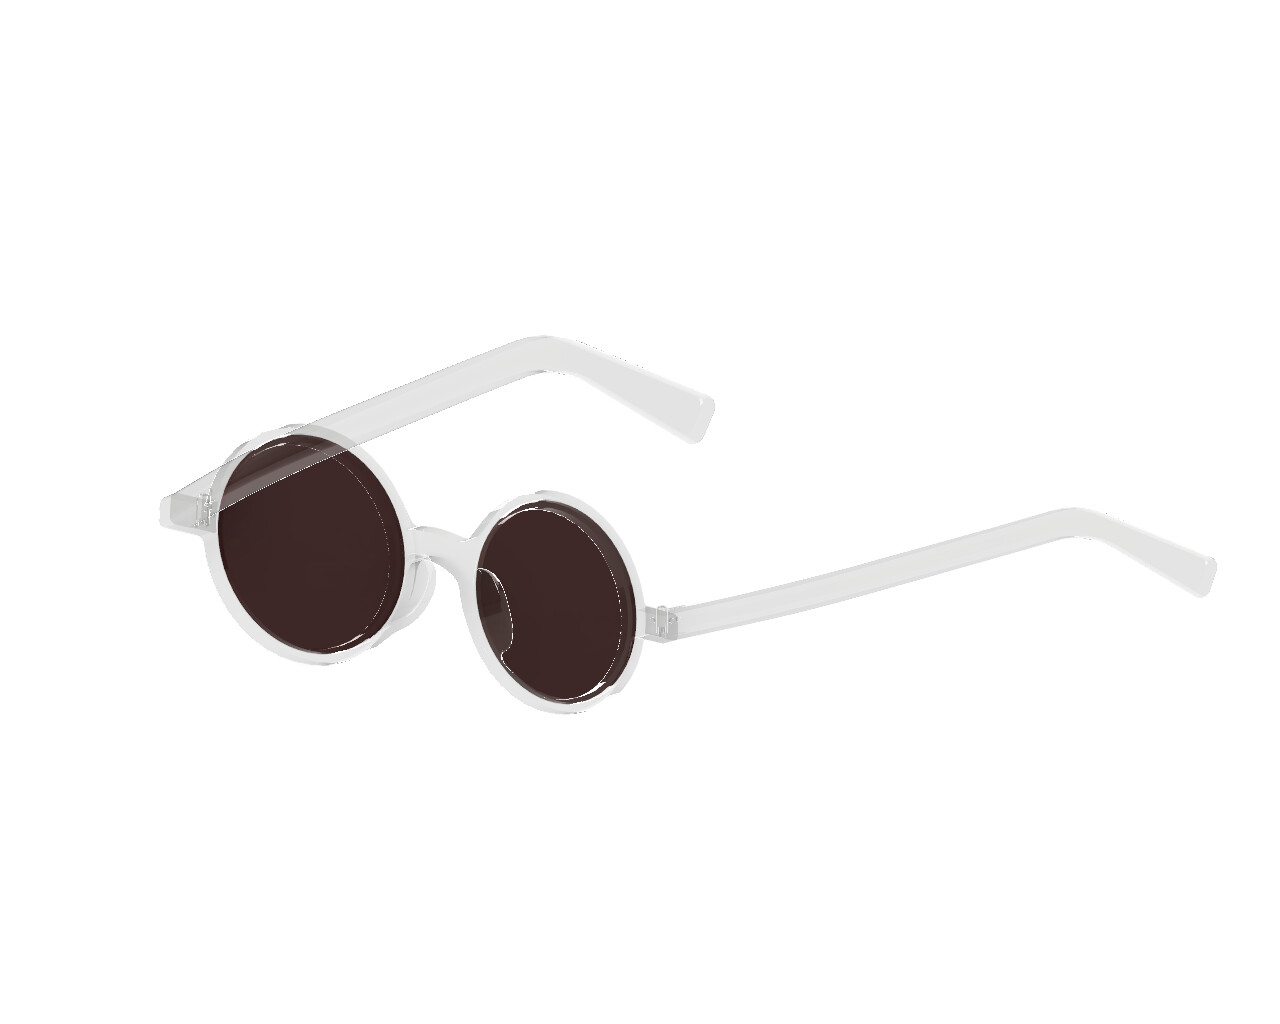 Round Sunglasses worn by Leon (Jean Reno) as seen in Leon: The Professional  | Spotern